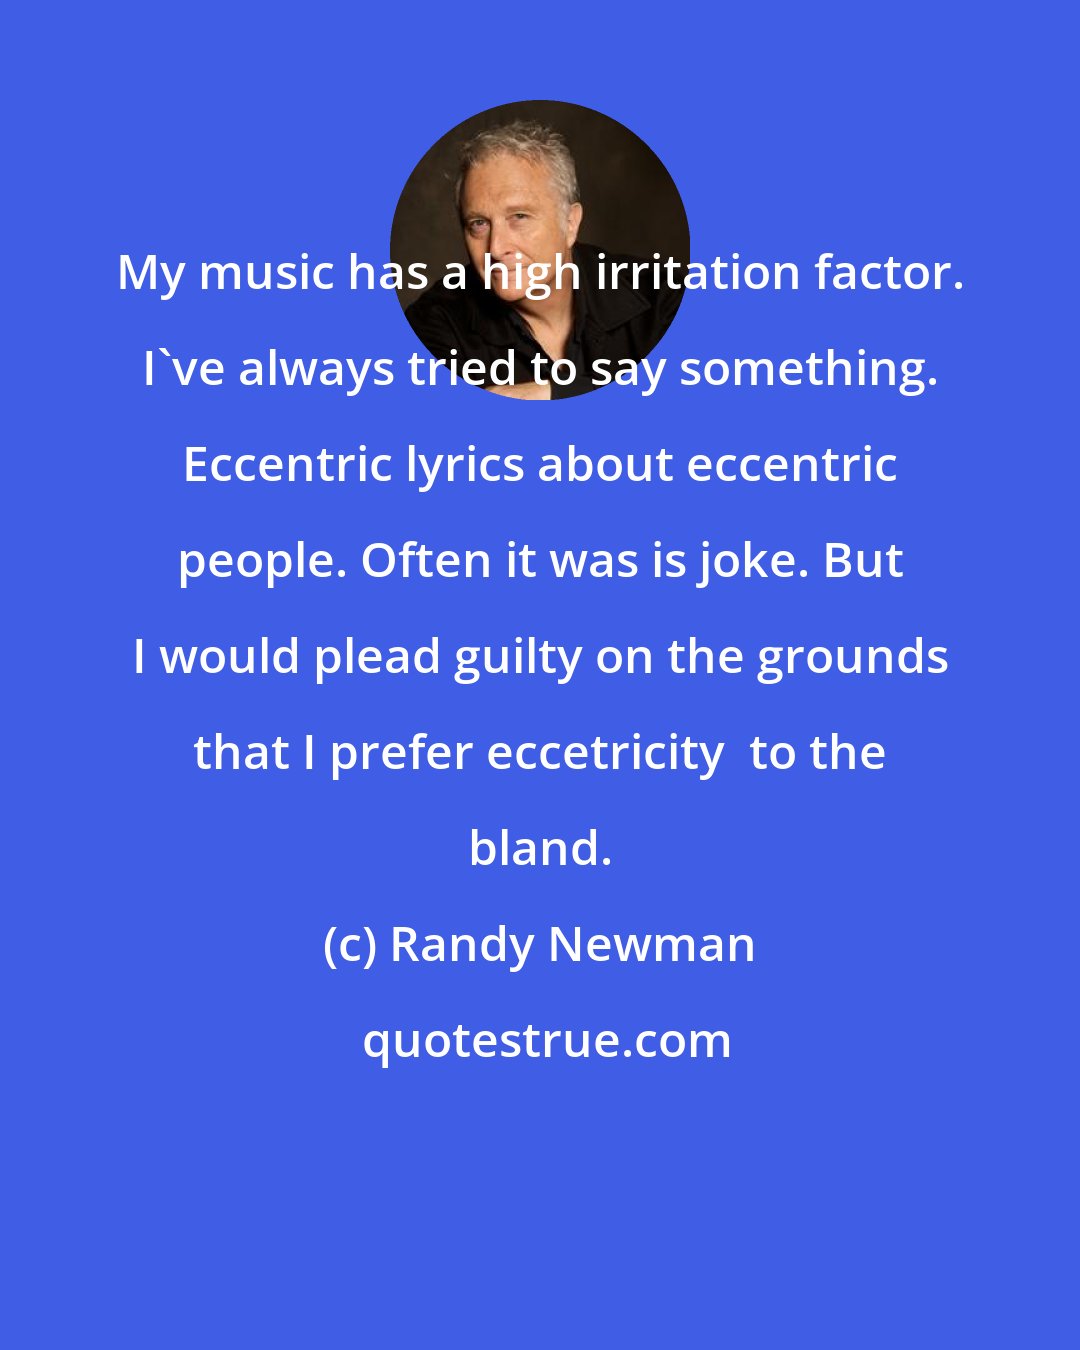 Randy Newman: My music has a high irritation factor. I`ve always tried to say something. Eccentric lyrics about eccentric people. Often it was is joke. But I would plead guilty on the grounds that I prefer eccetricity  to the bland.